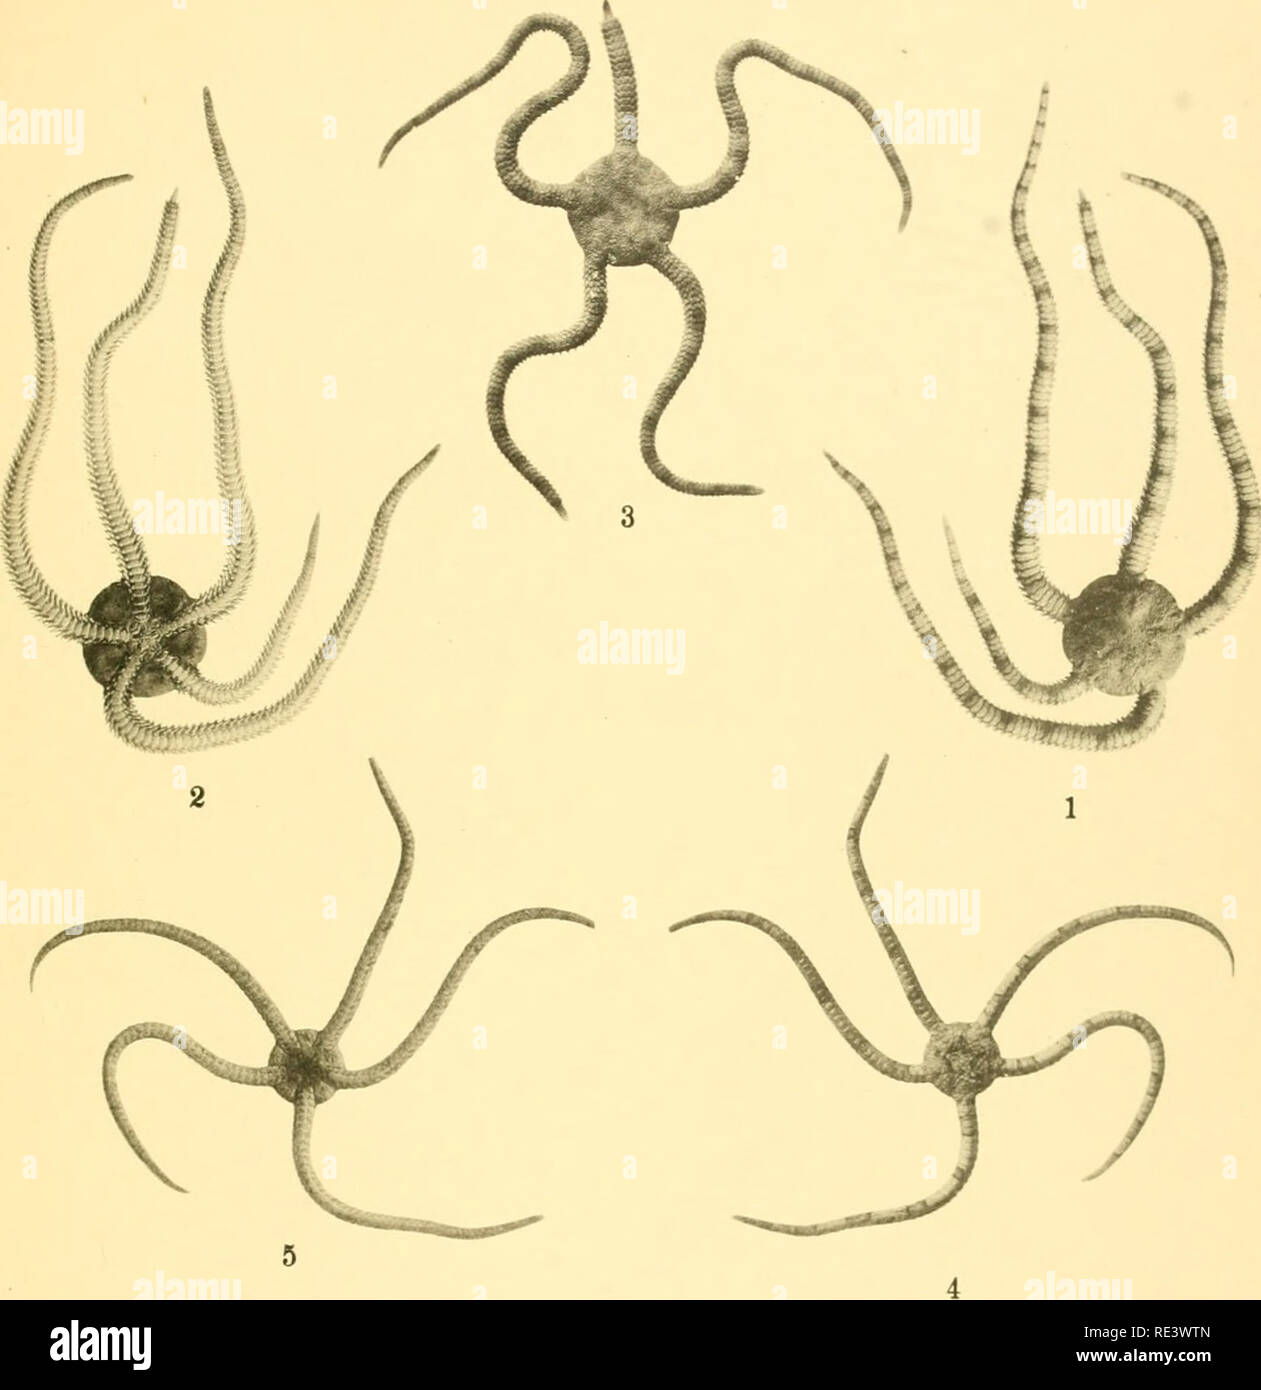 . The echinoderm fauna of Torres Strait: its composition and its origin. Echinodermata. PLATE 35 ¥ I. • • I • 8 1. Ophioplocus tmbricalus. aboral surface. X I. 2. Ophioplocus imbricatus, oral surface. X I. 3. Opniopiocus imbricatus. aboral surface of specimen with heavily marked disk. X |. 4. Ophiarachnella gorgonia, aboral surface. X I. 5. Ophiarachnella gorgODia, oral surface. X }, 6. Fibularia volva (?). aboral surface. X |. 7. hibulana volva ( ? ). oral surface. X j. 8. Fibulana volva ( ? ). side view. X I. 9. Fibularia volva ( &gt;). intenor view of oral half of lest. X I.. Please note th Stock Photo